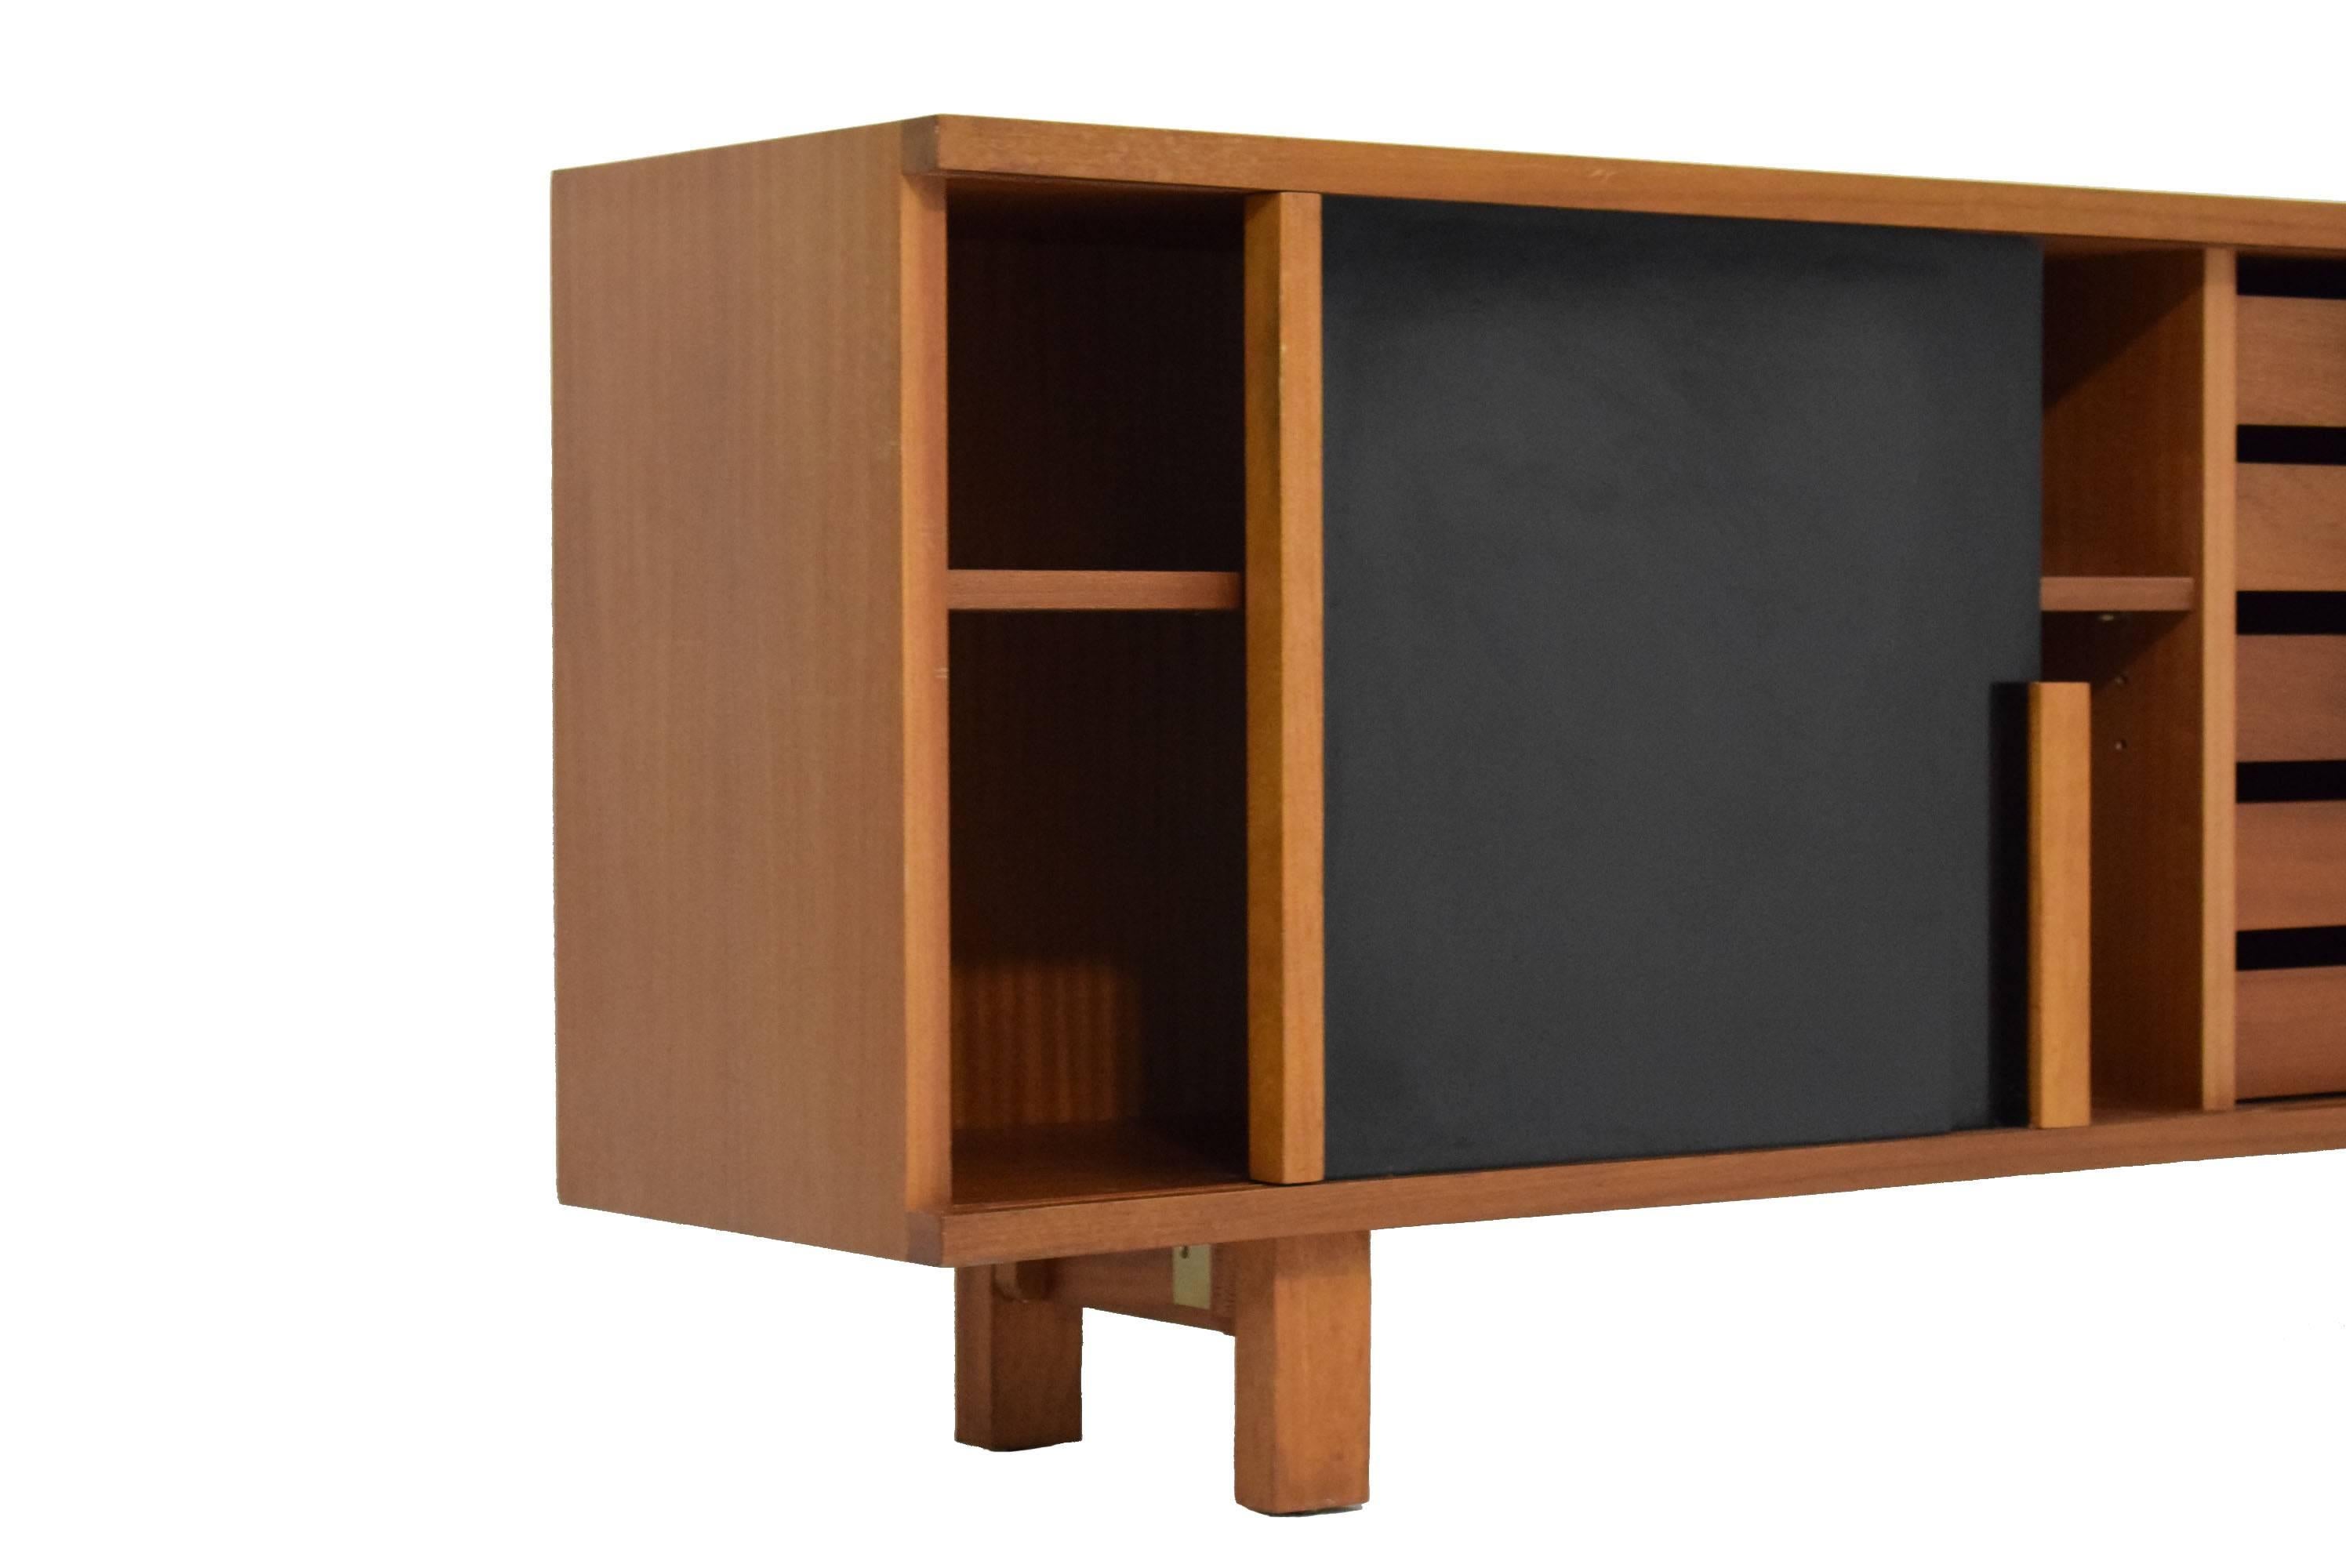 Rare Midcentury Sapele and Black Sliding Door Sideboard In Excellent Condition For Sale In London, GB